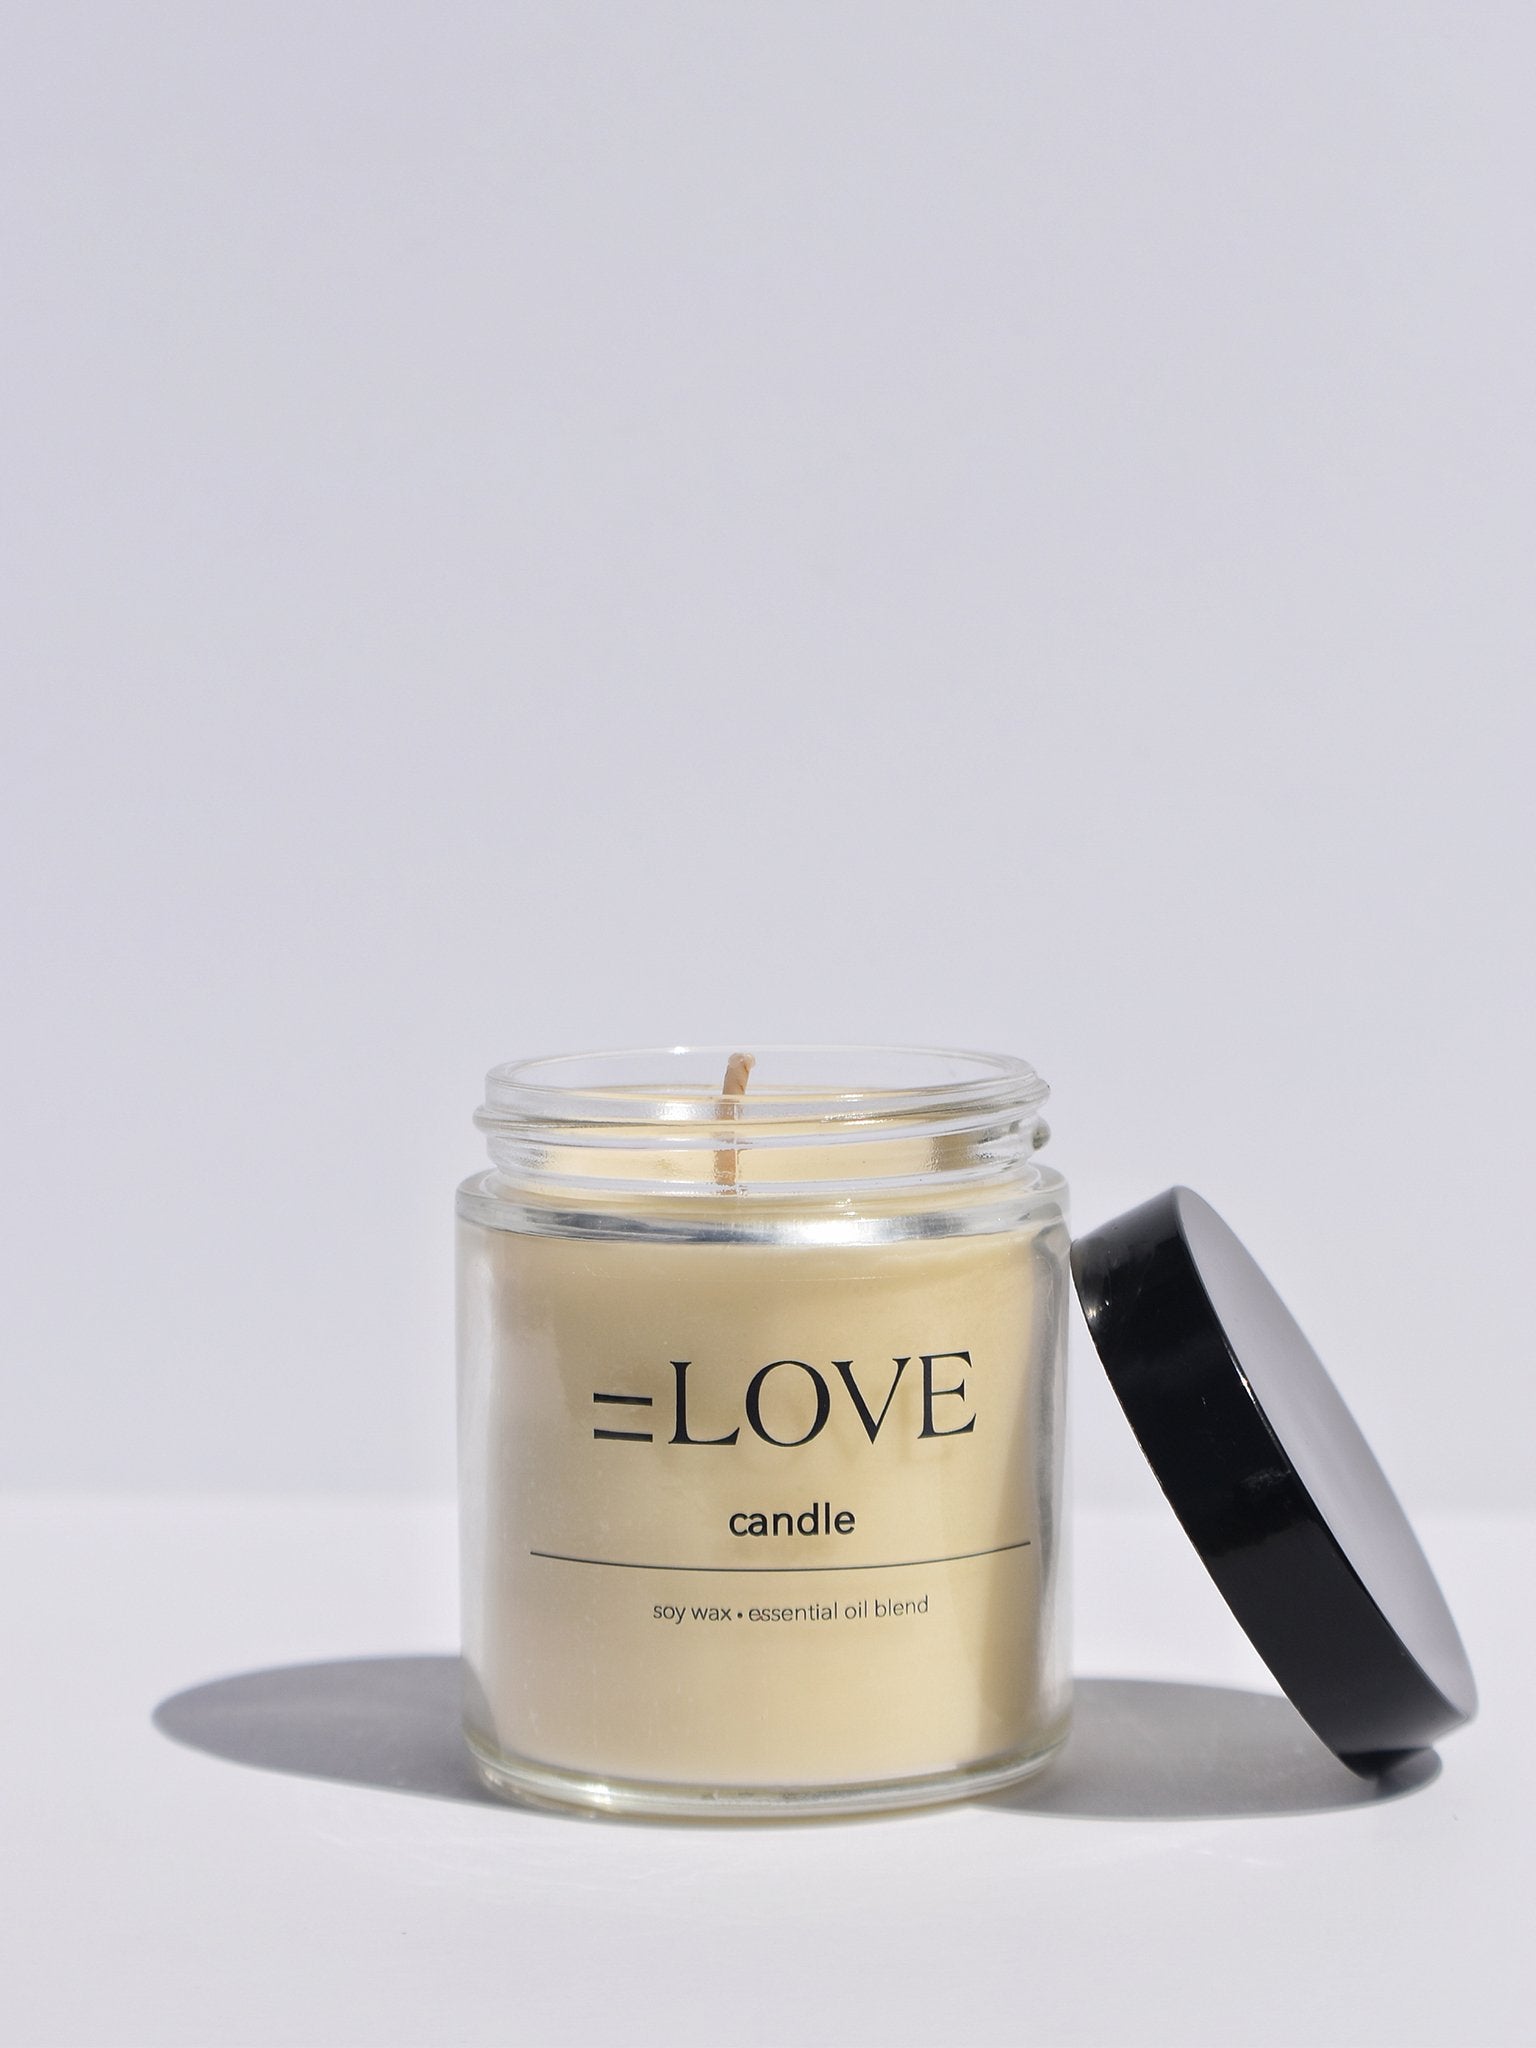 =LOVE Candle